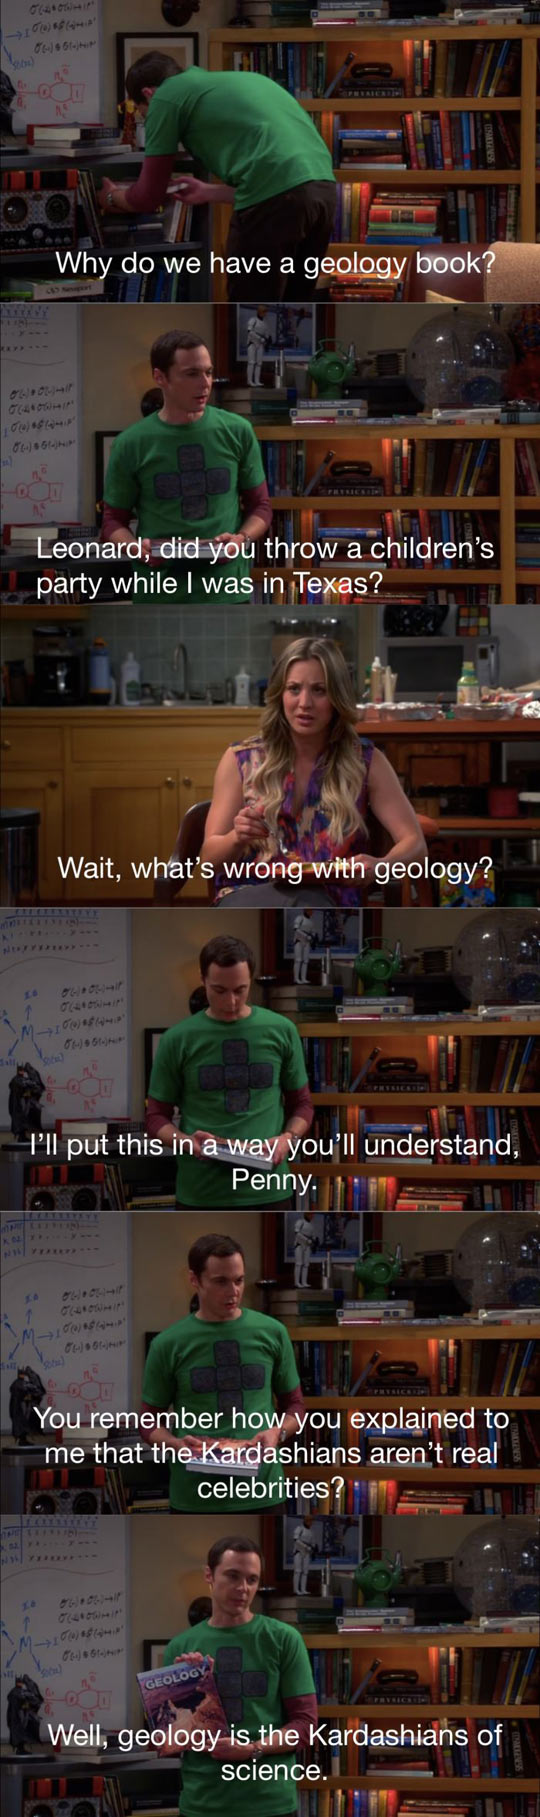 Geology is the Kardashians of science.